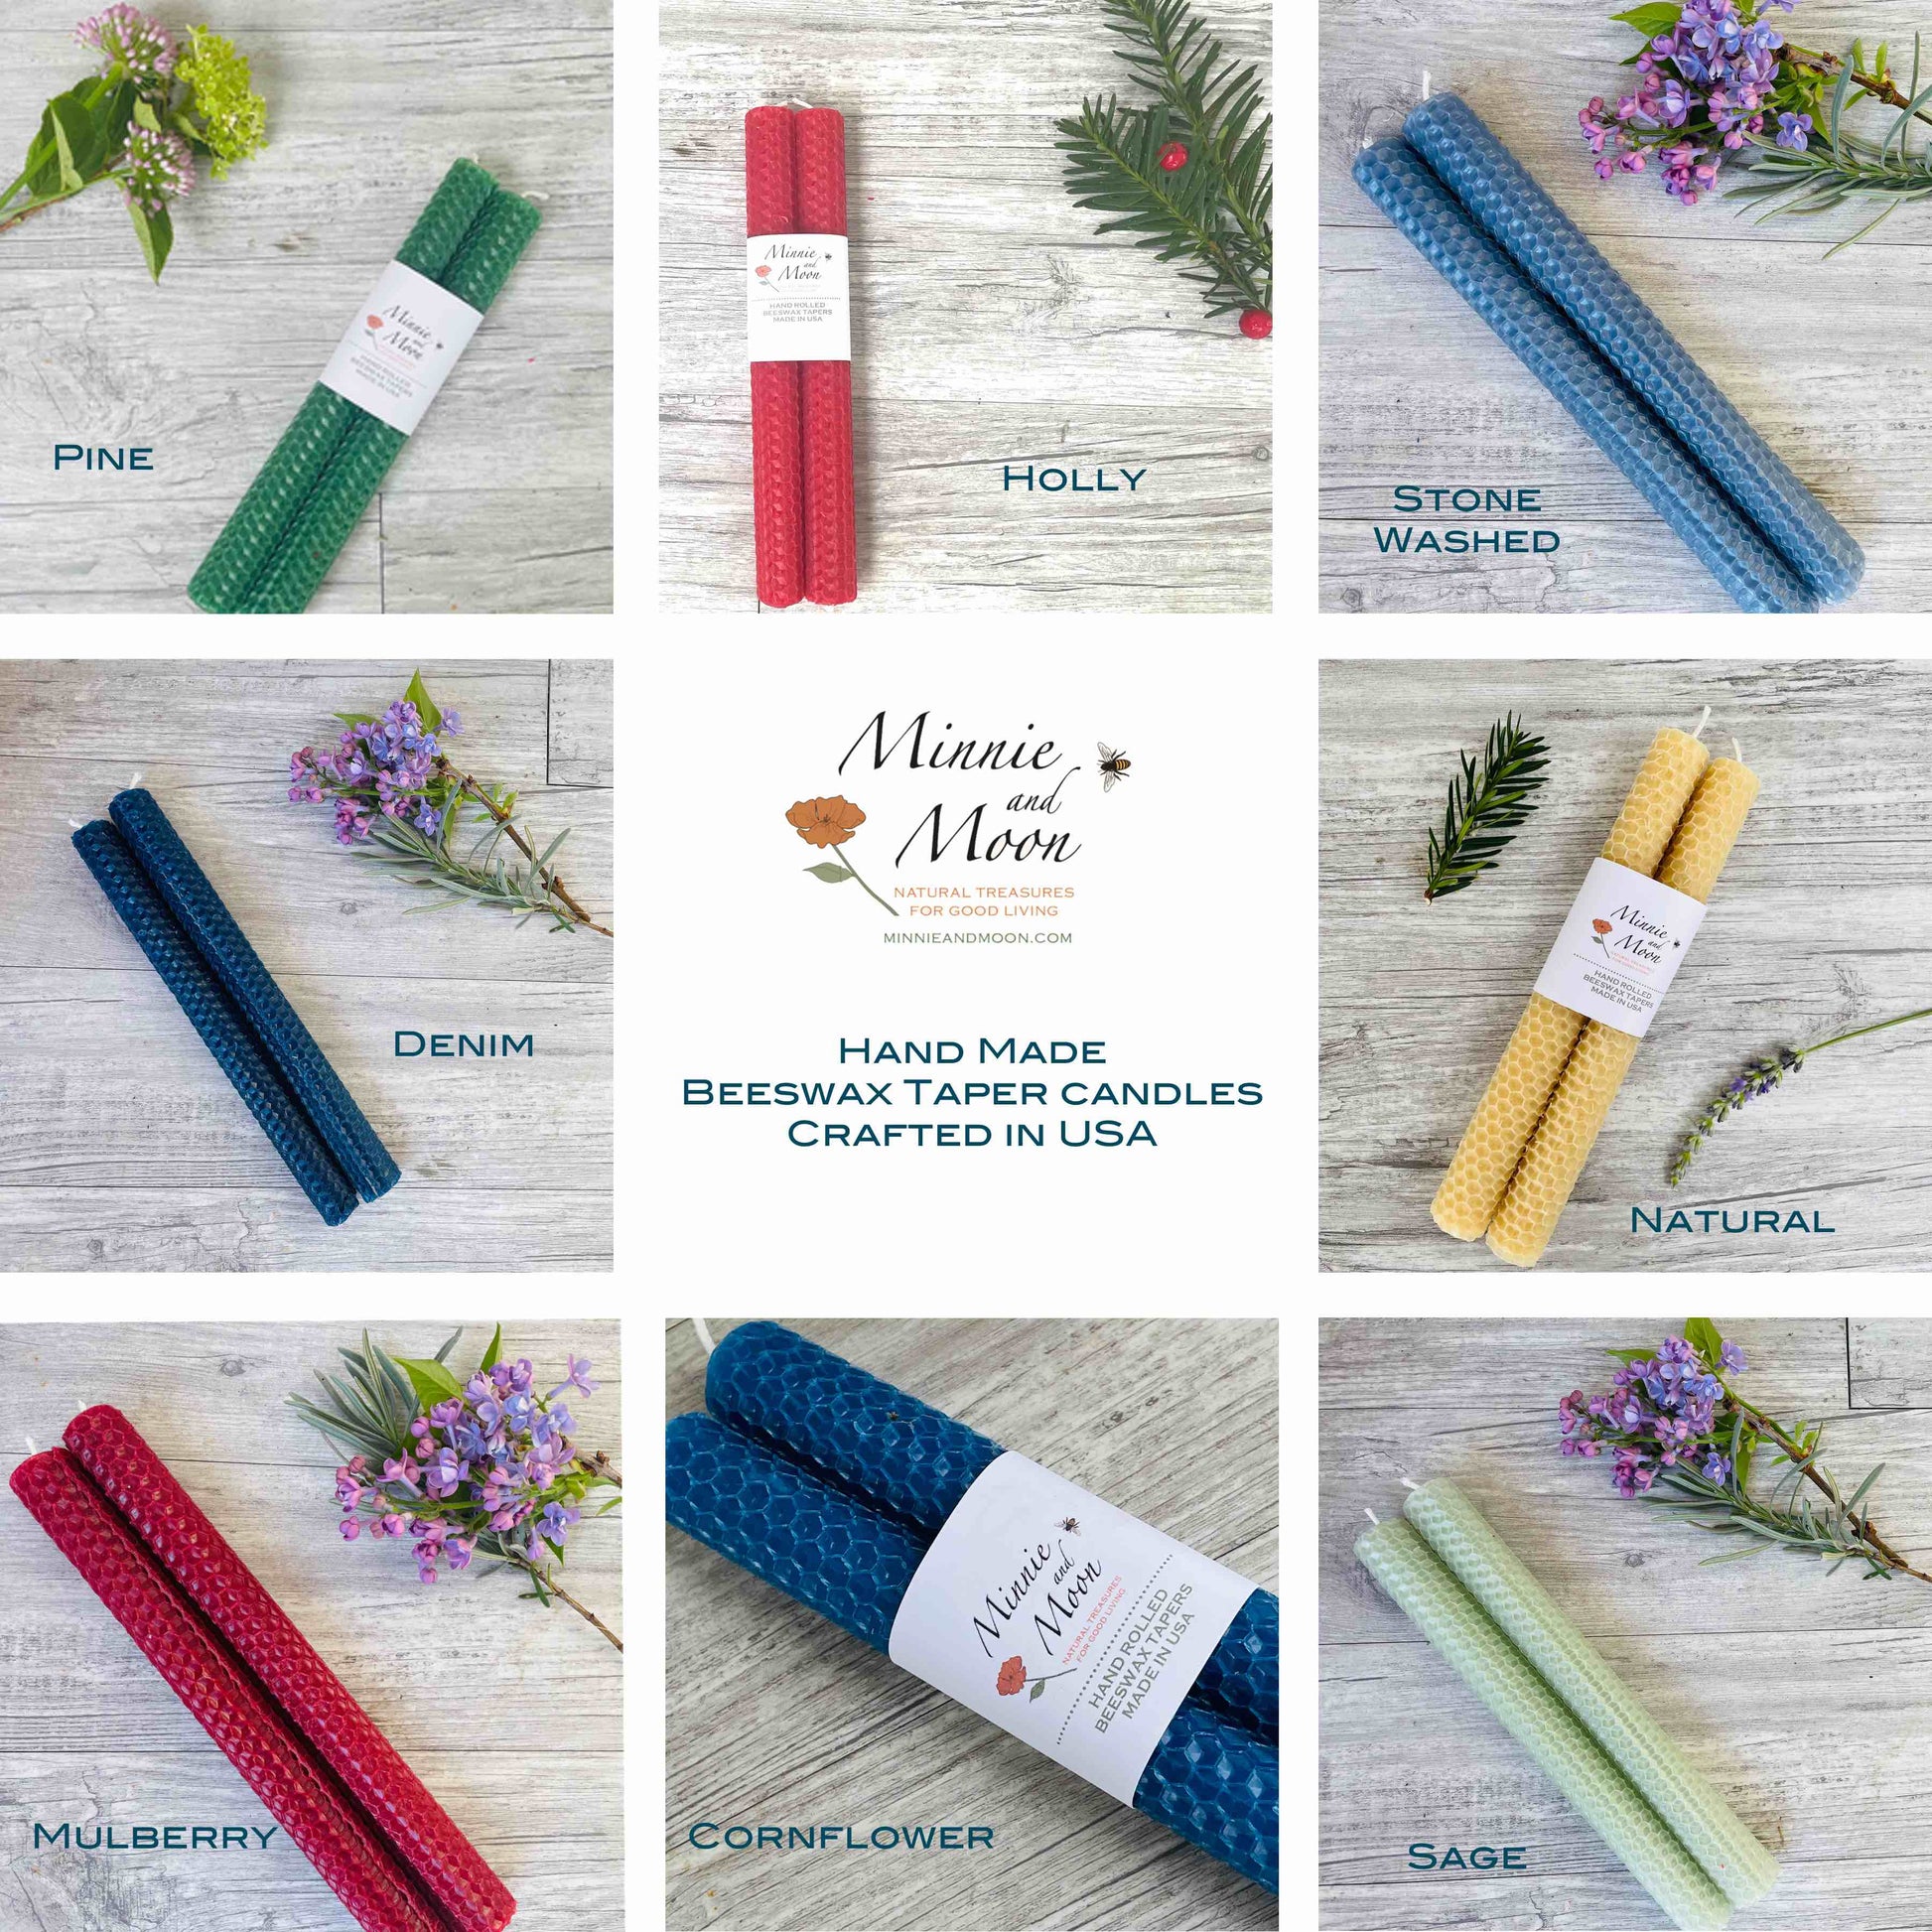 Honeycomb Beeswax Taper Candles, Gifts